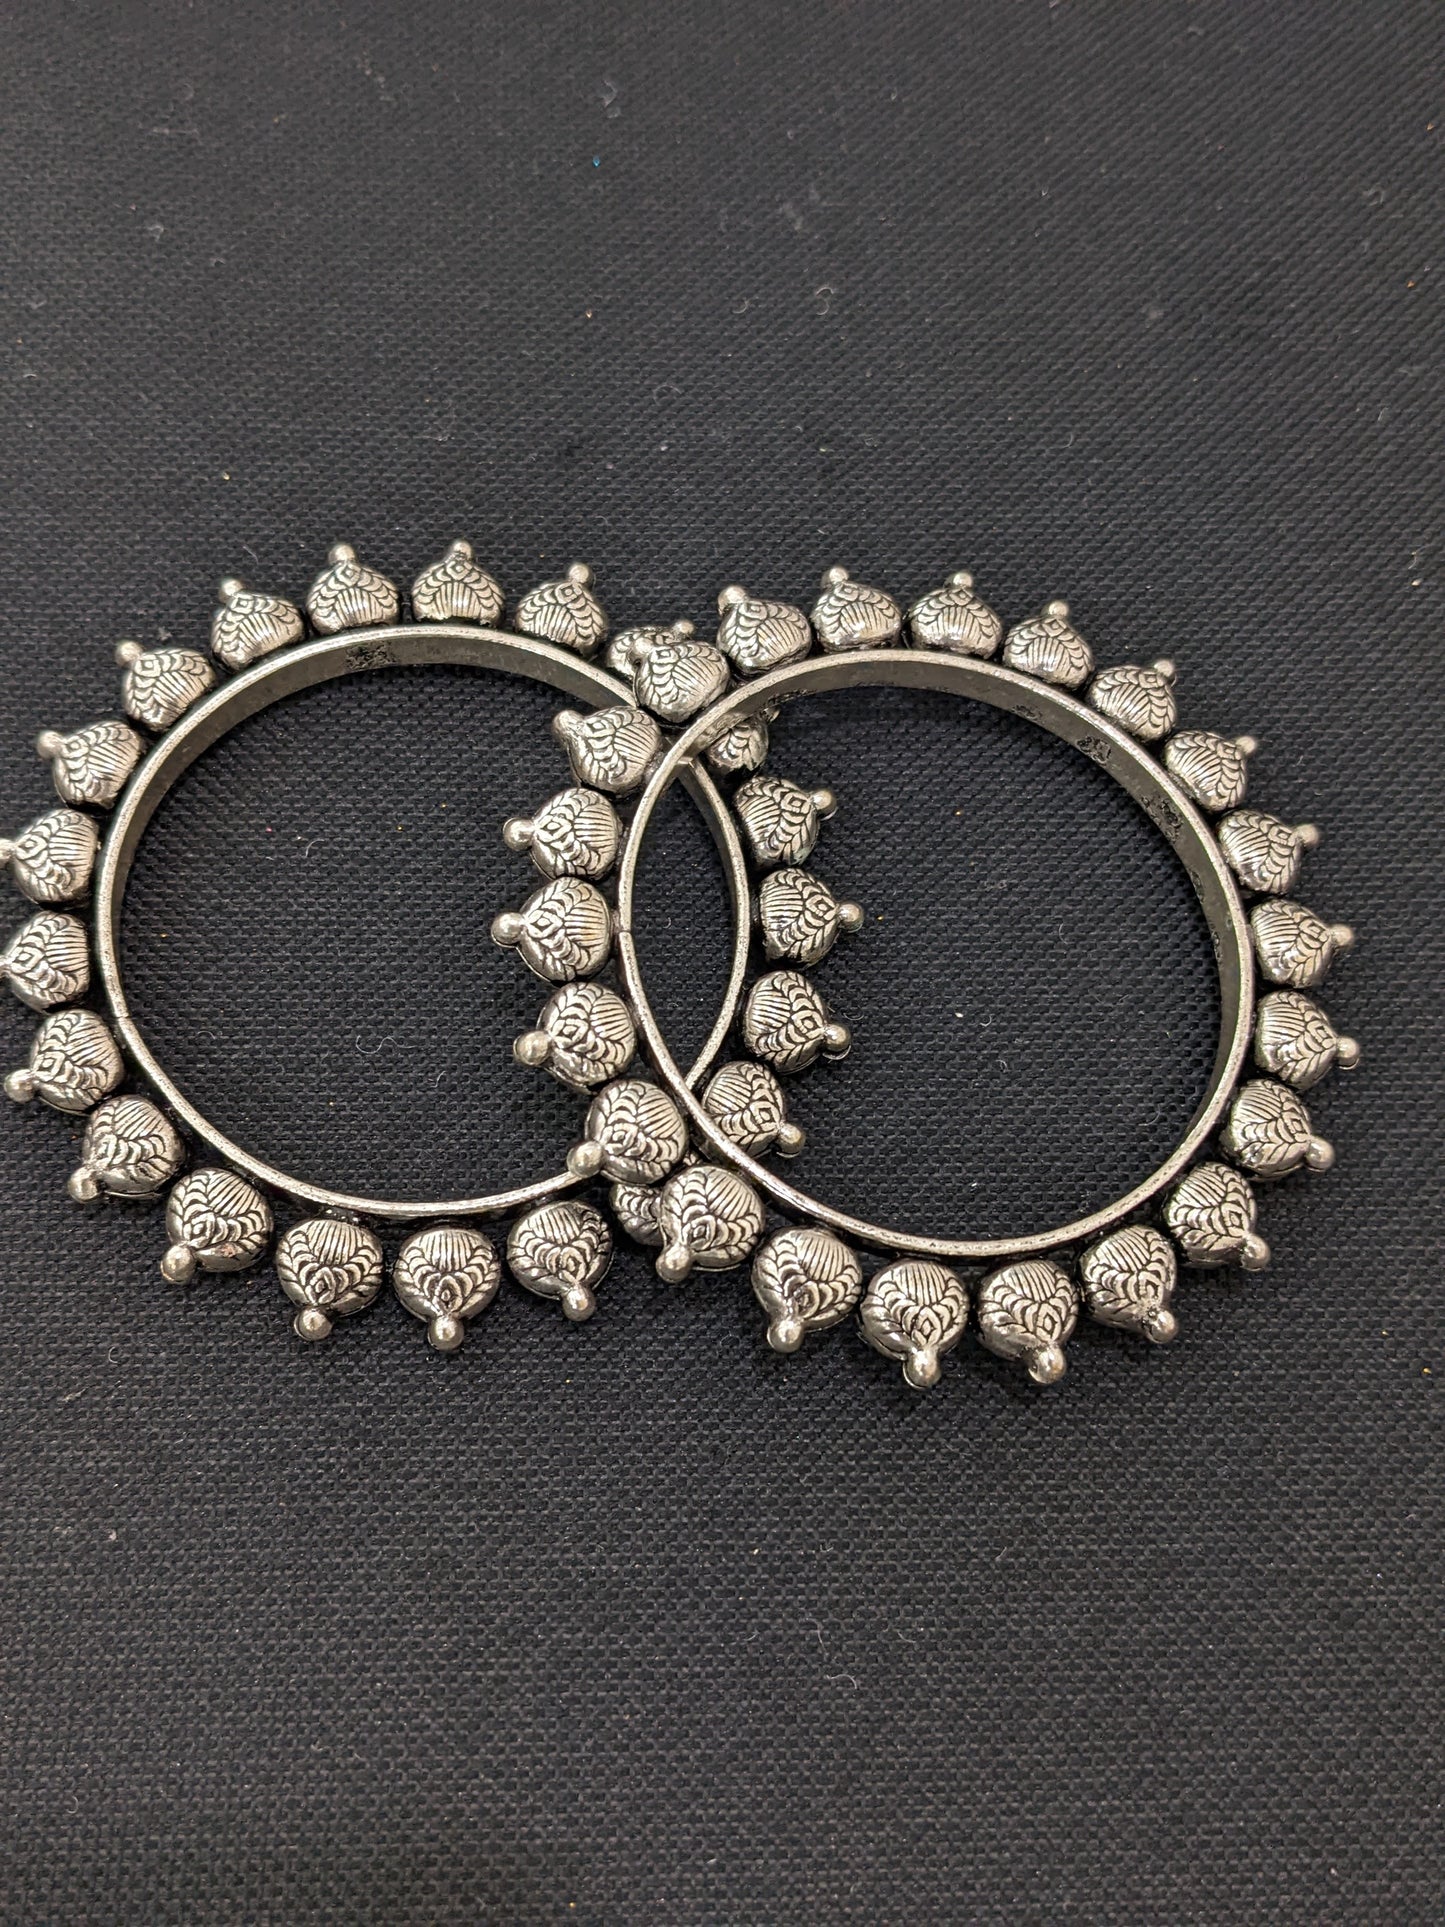 Oxidized silver pair bangles - Etched ball design